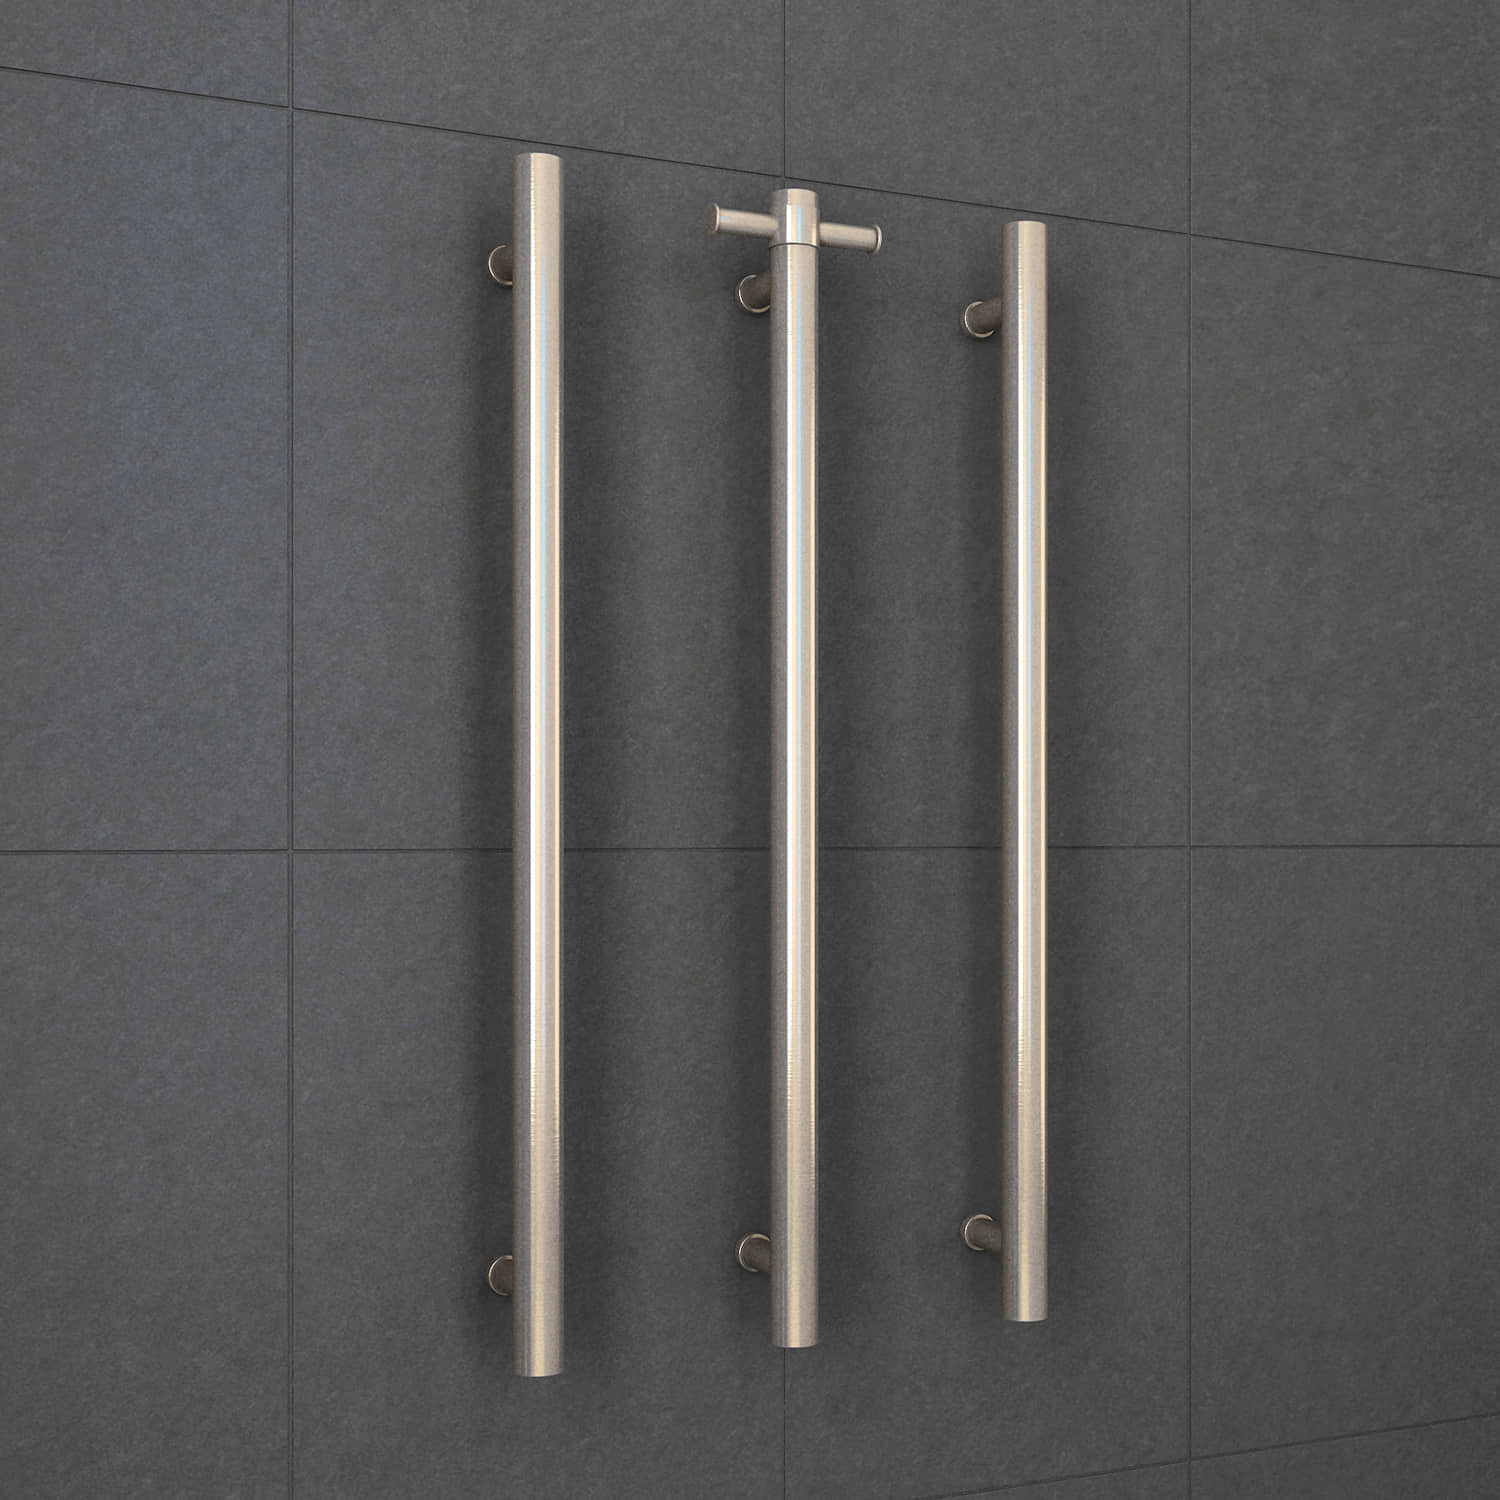 Brushed nickel Single heated towel rail from Infinity Plus bathrooms deliver AU wide